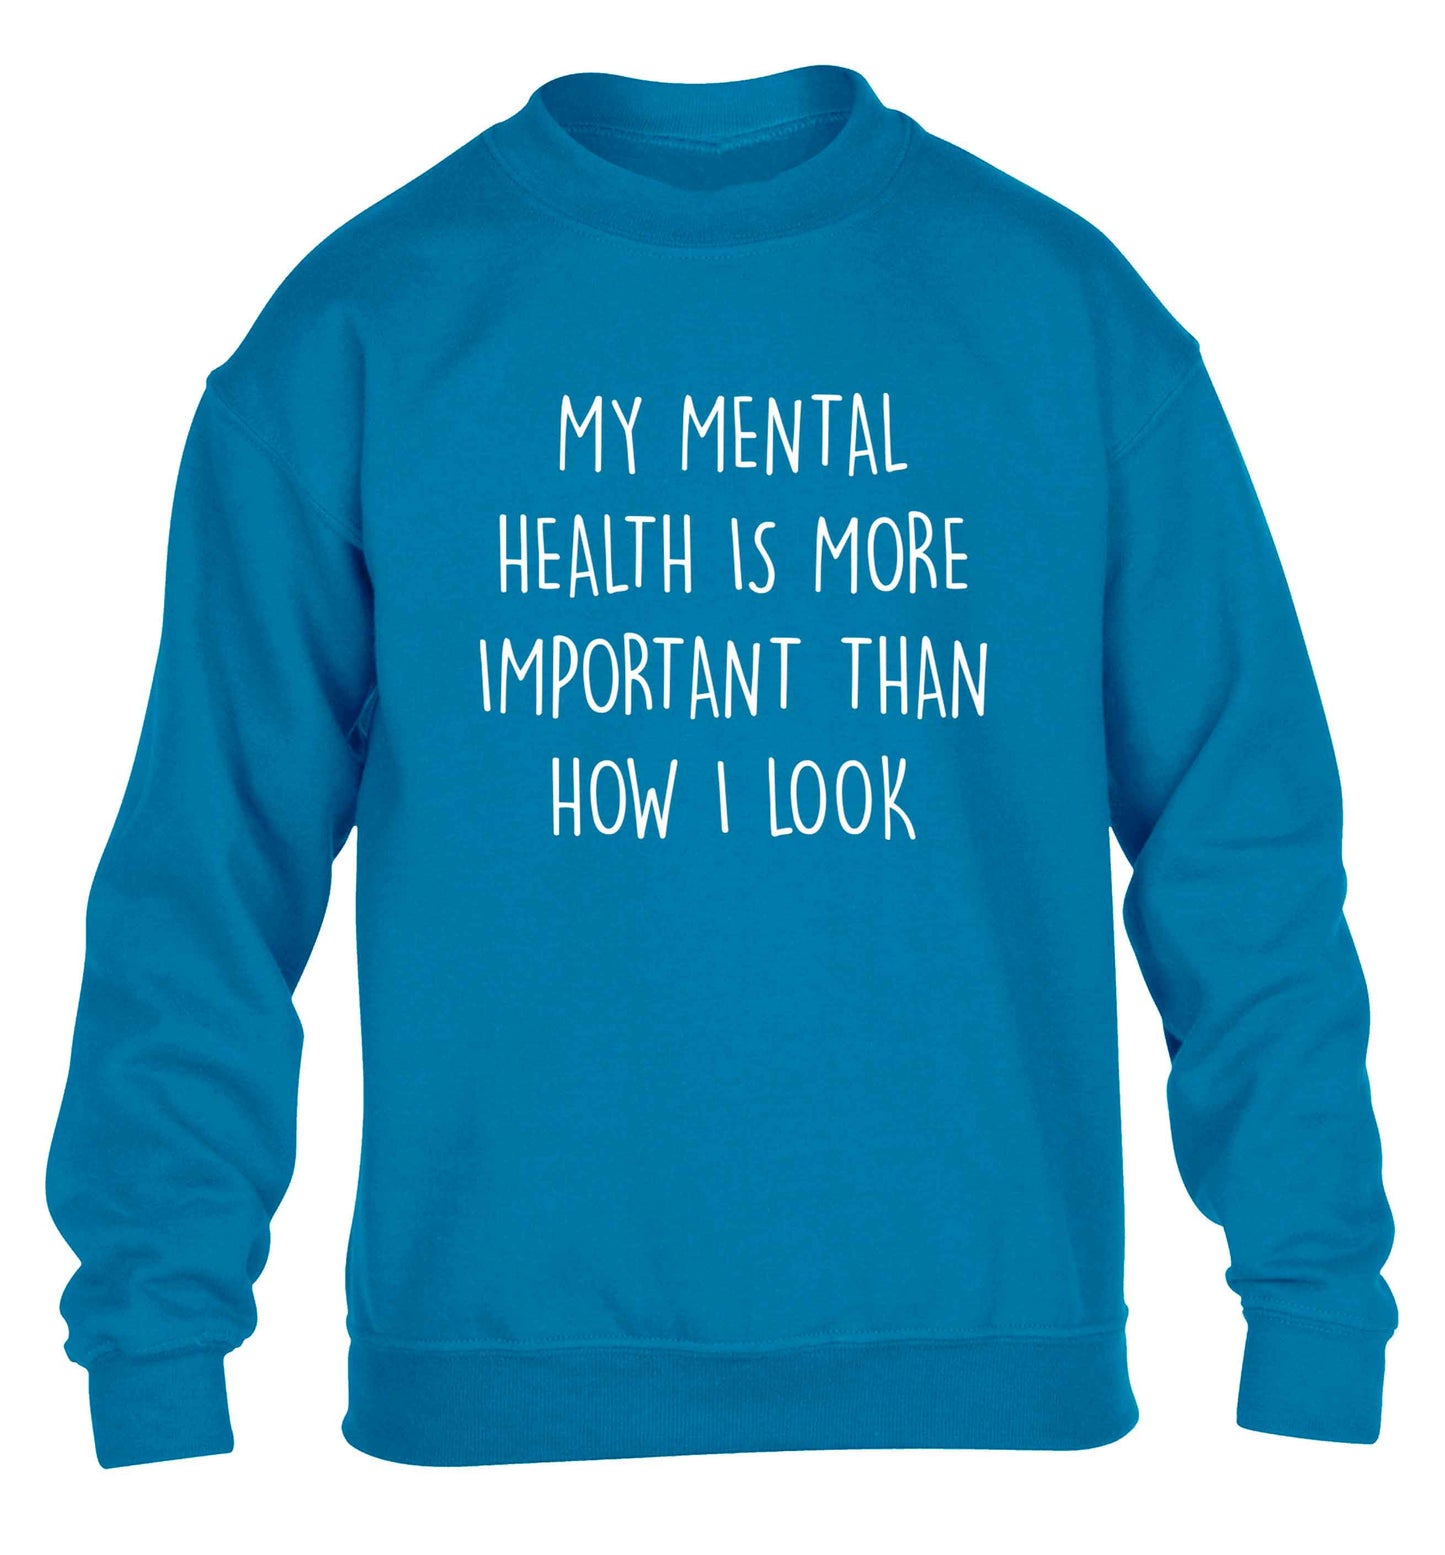 My mental health is more importnat than how I look children's blue sweater 12-13 Years